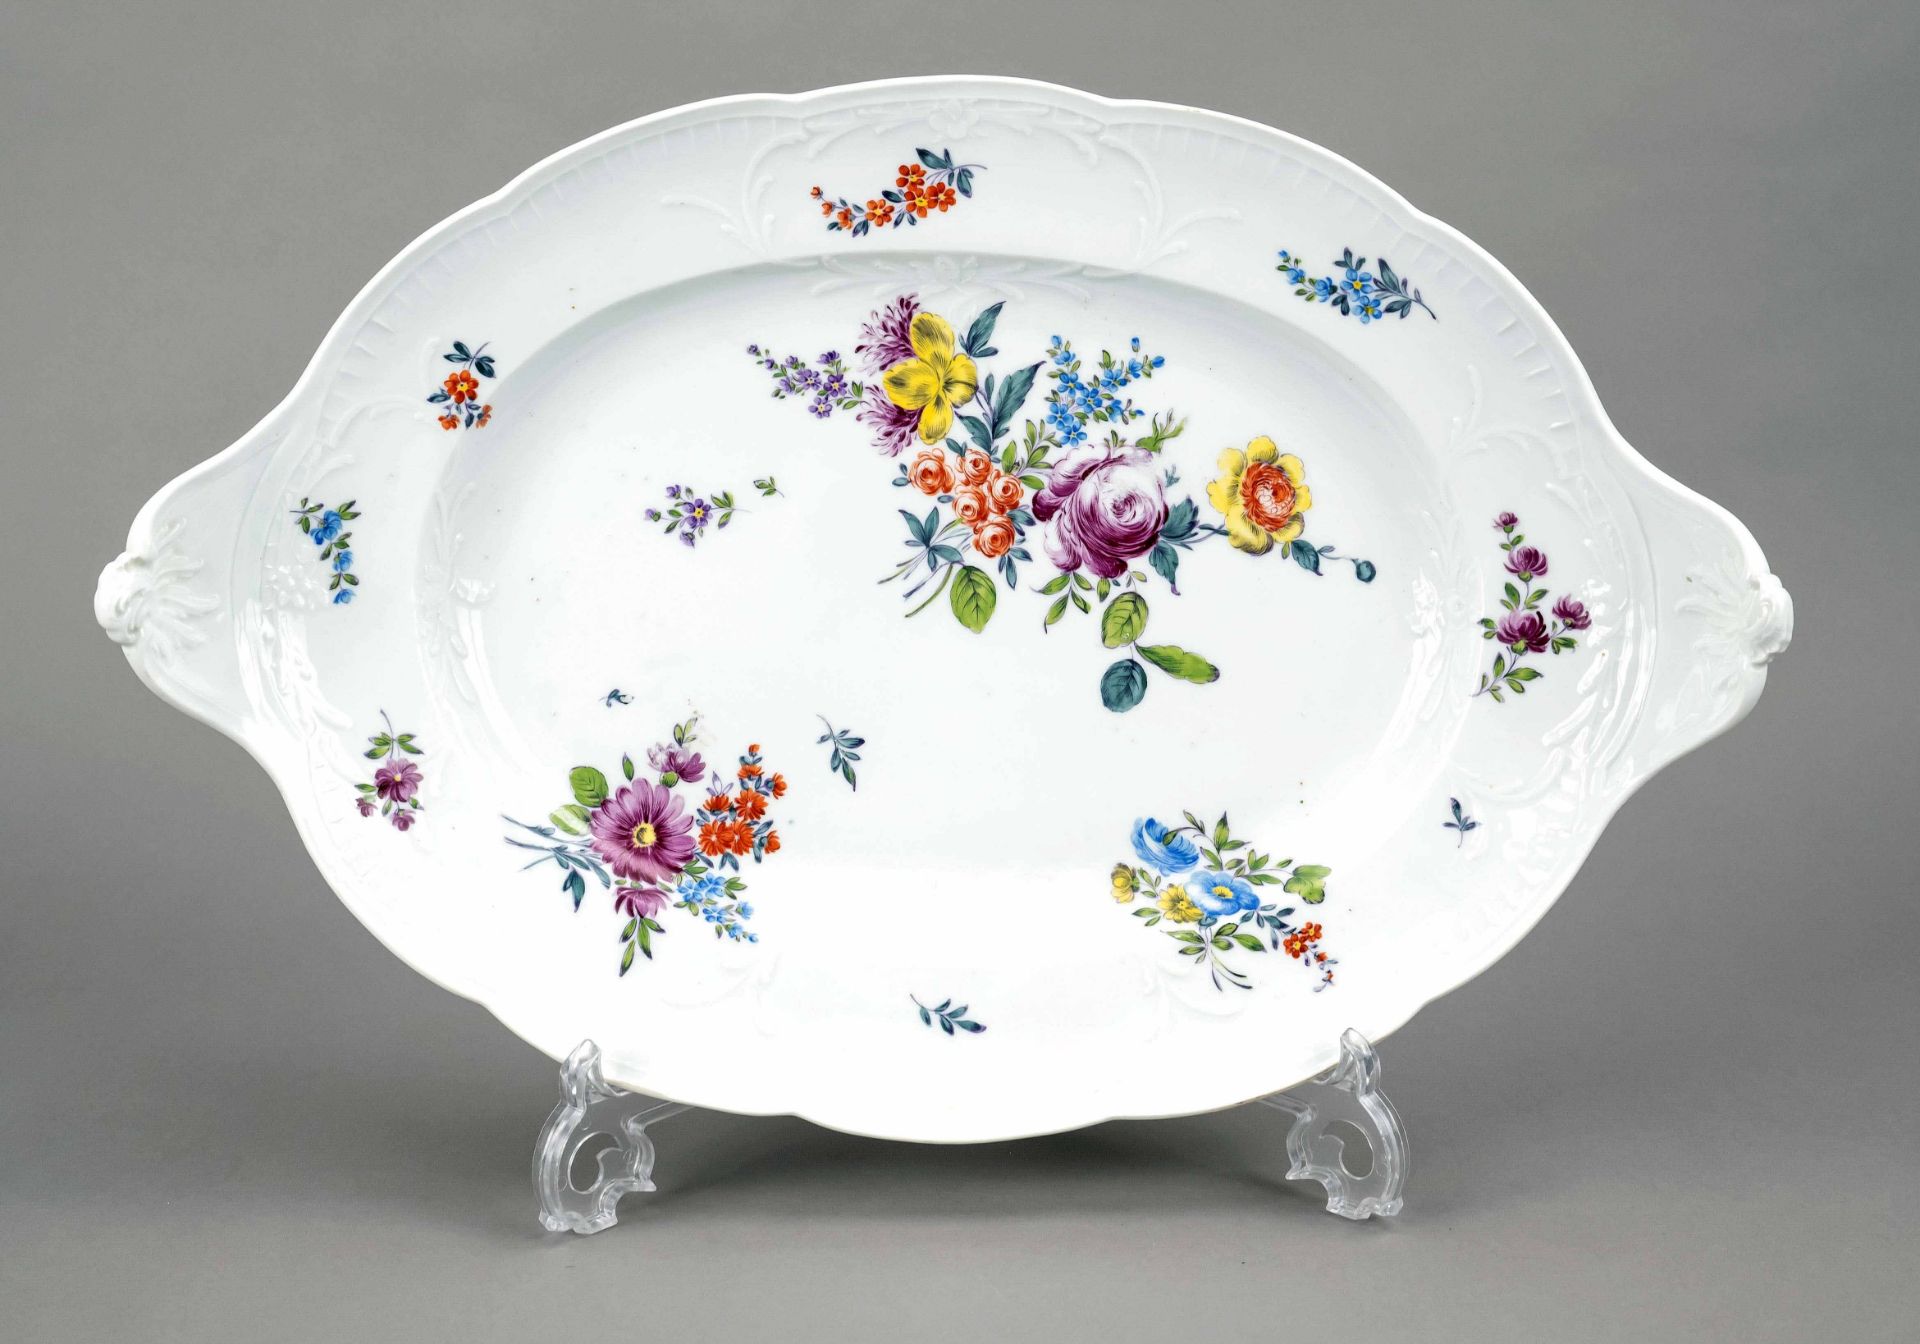 Large rococo serving plate, Meissen, mark 1740-80, oval shape with rocaille handles, on the flag